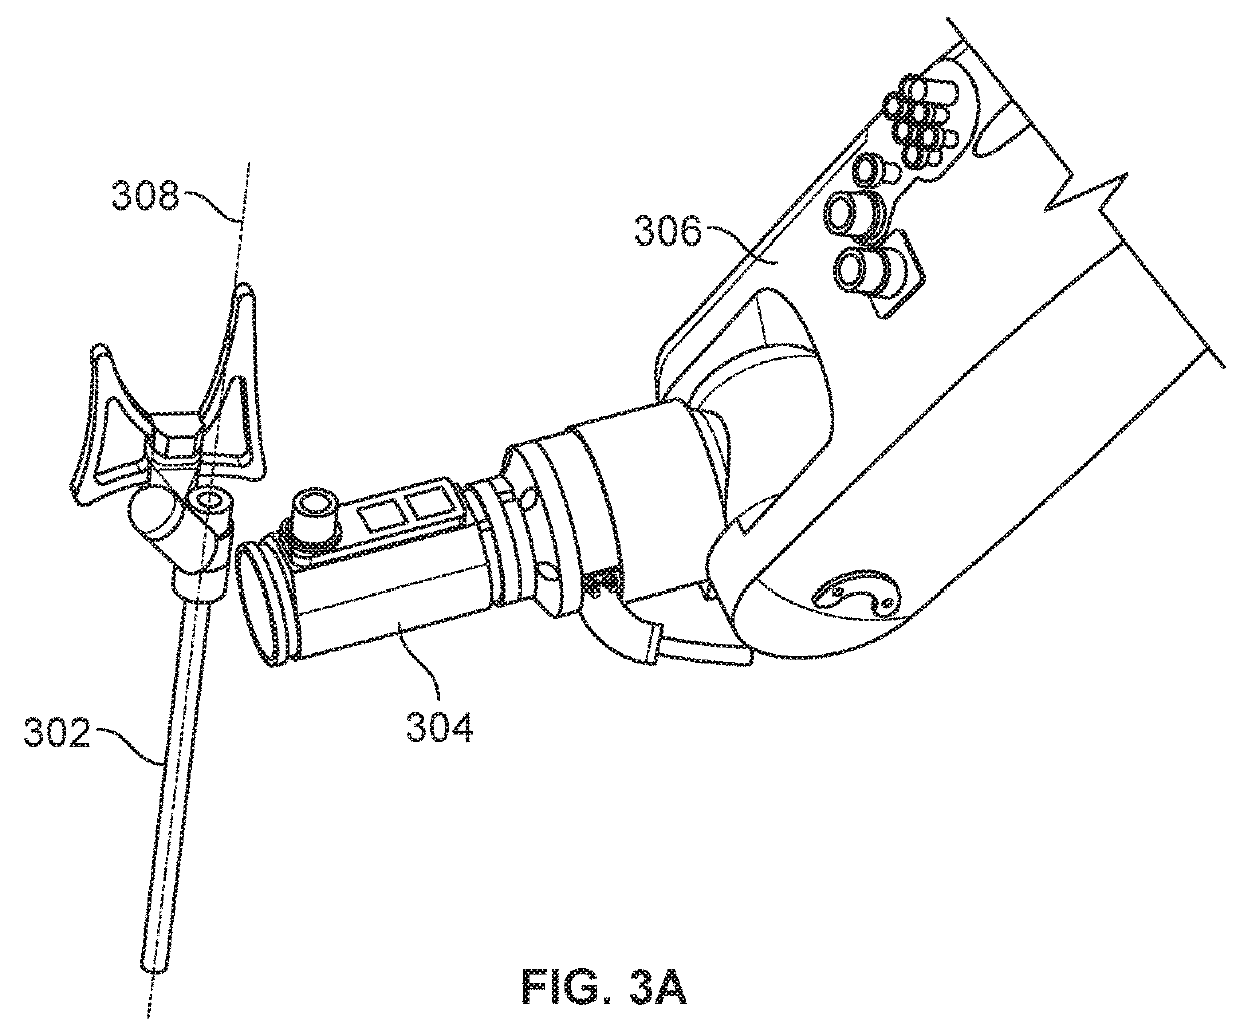 Surgical instrument holder for use with a robotic surgical system